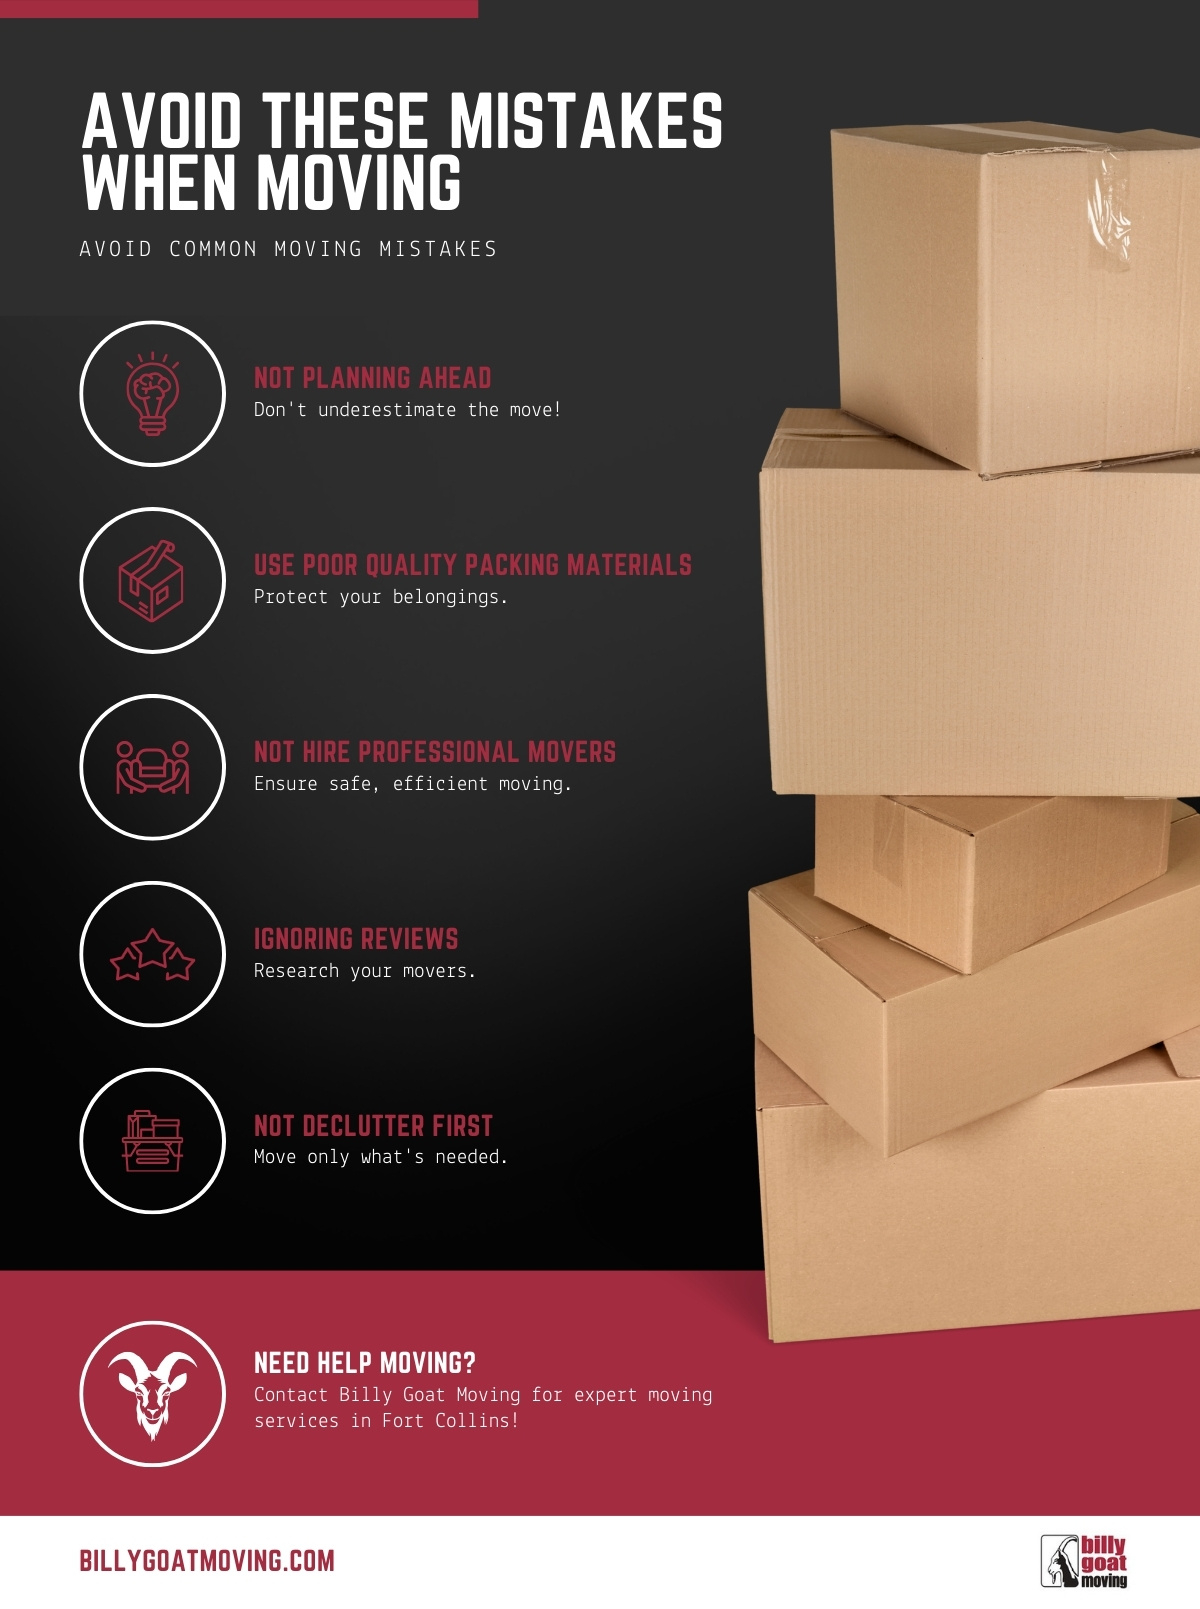 M7939 - Billy Goat Moving - Infographic - Avoid These Mistakes When Moving.jpg